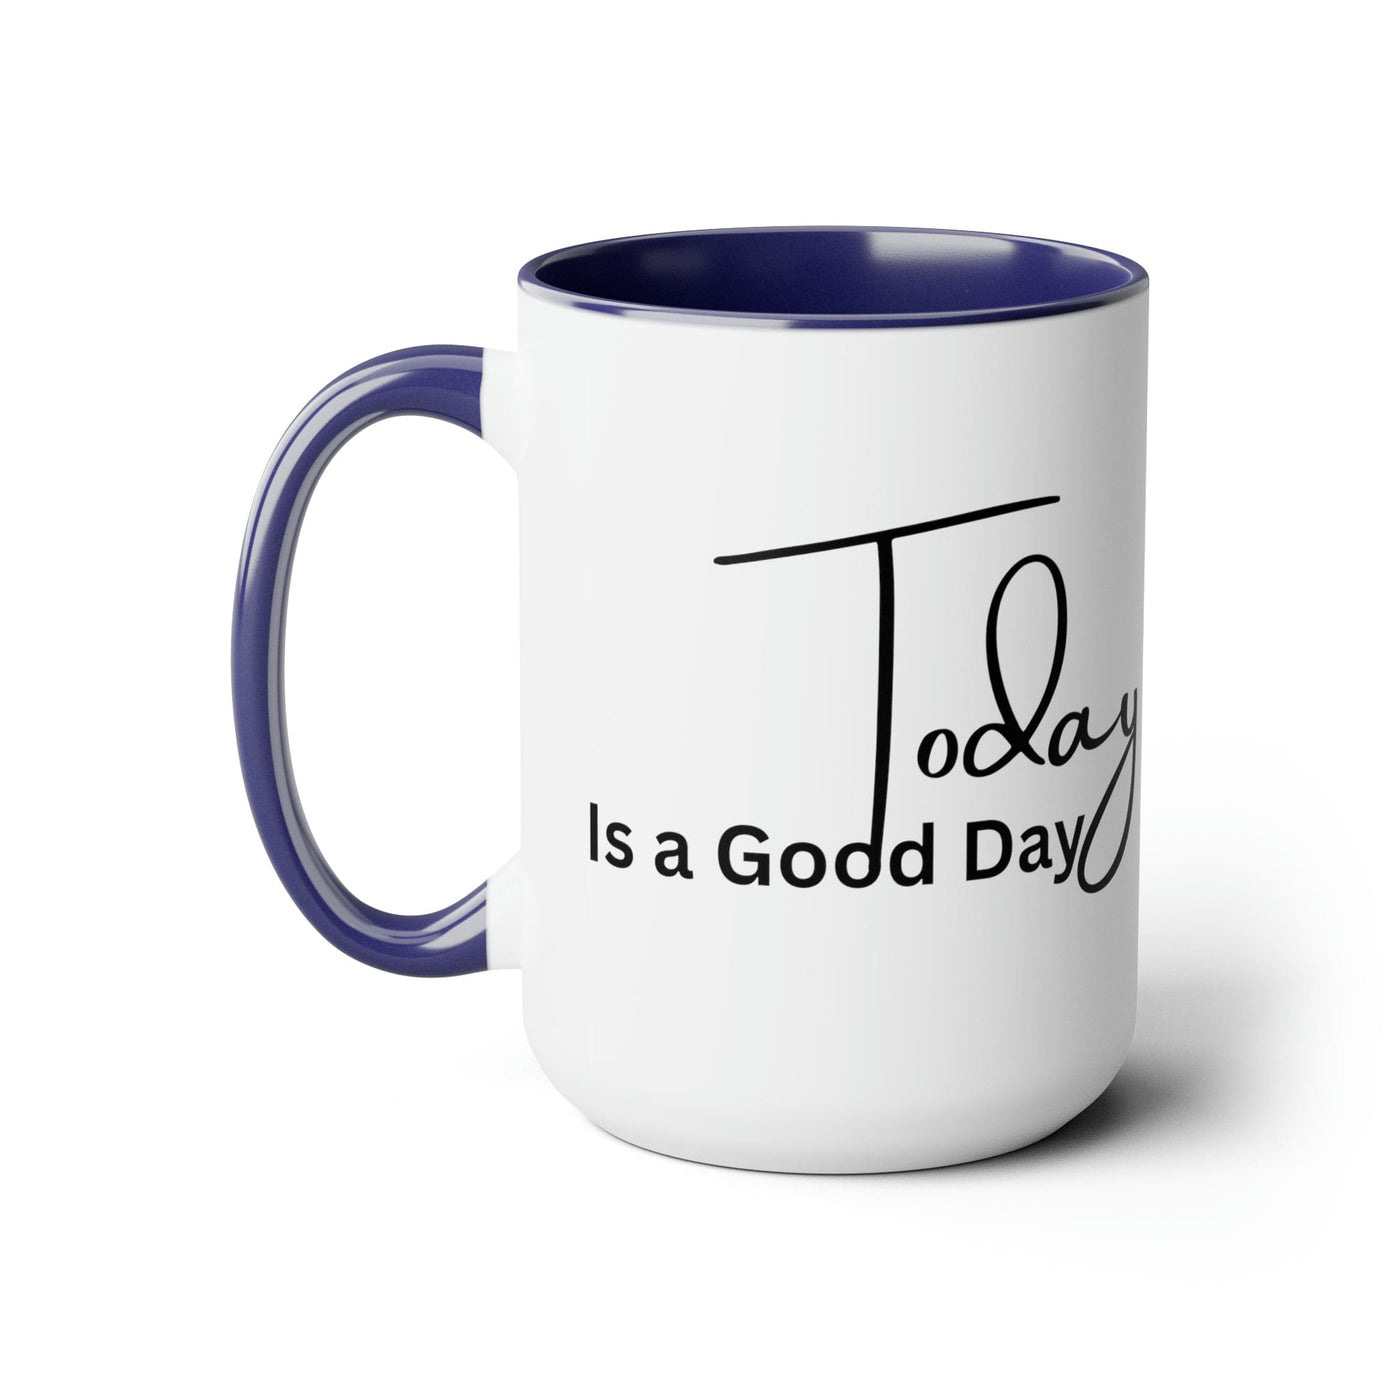 Accent Ceramic Coffee Mug 15oz - Today Is a Good Day Black Illustration